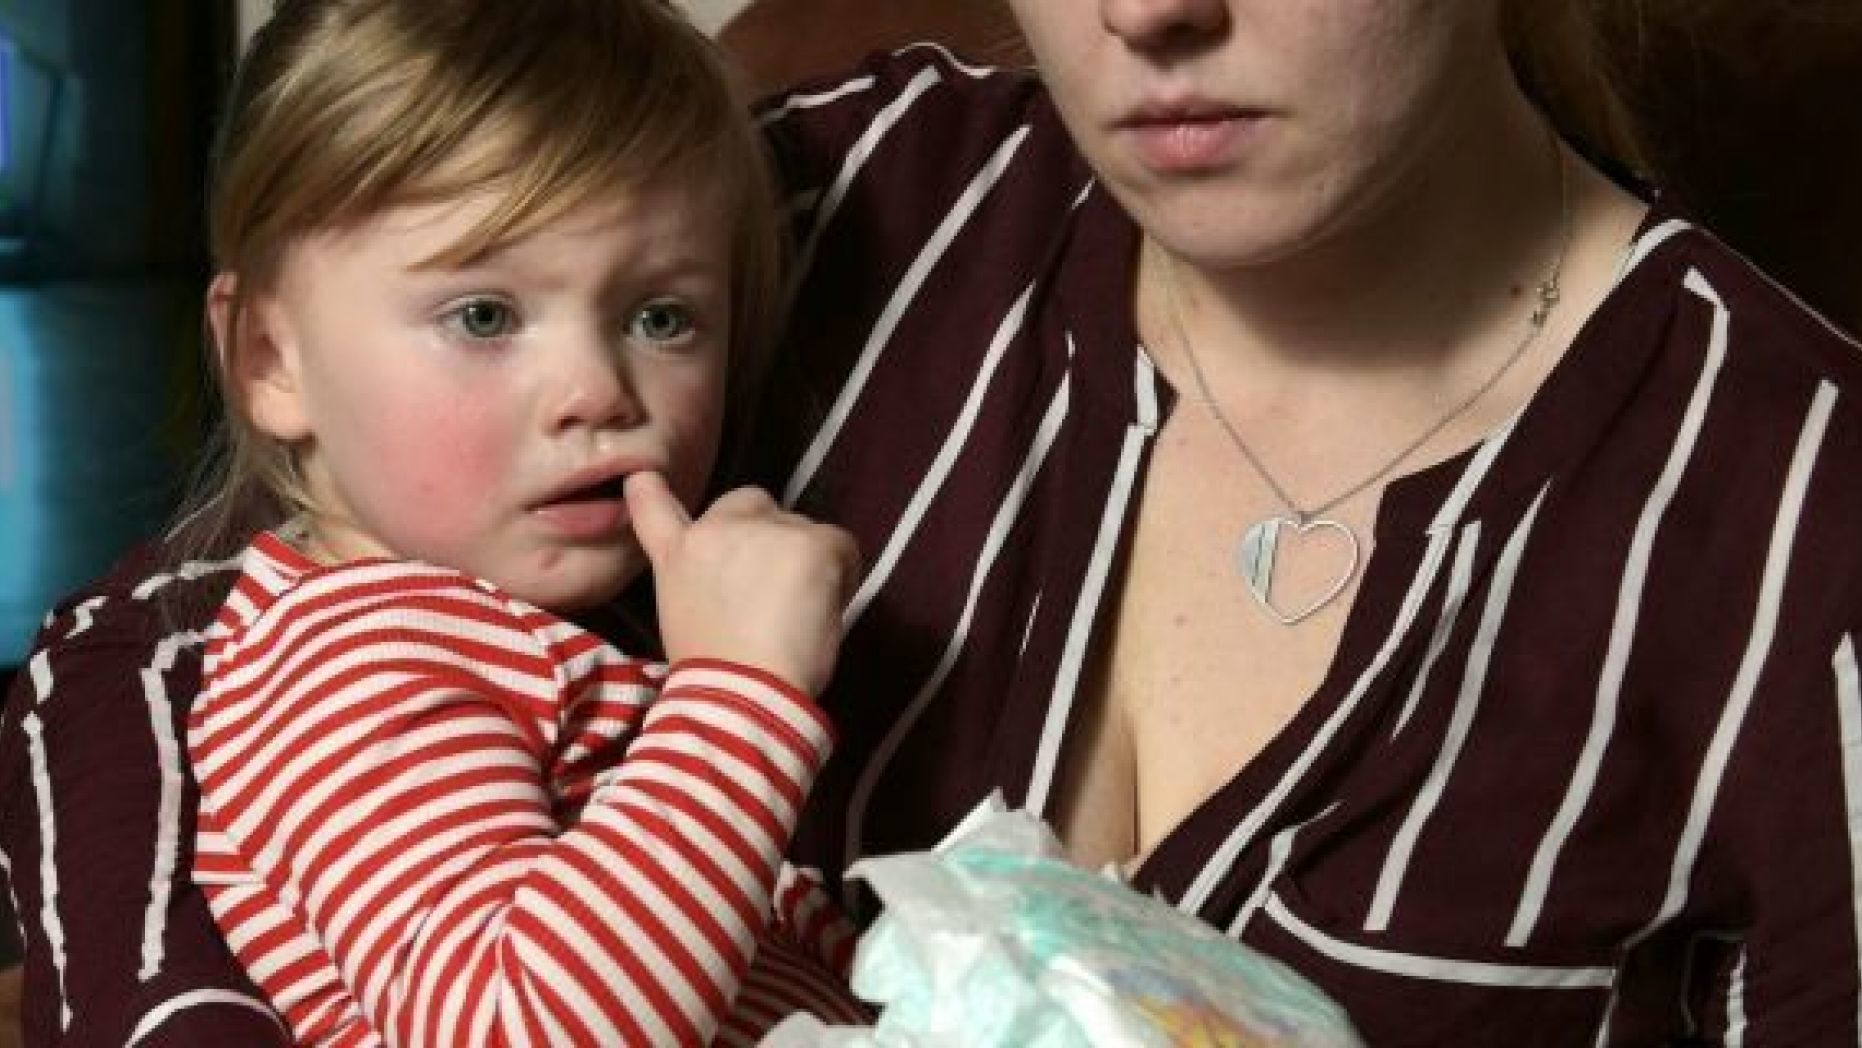 Charlotte Downie claims she found glass in her daughter's Little Angels diaper. 